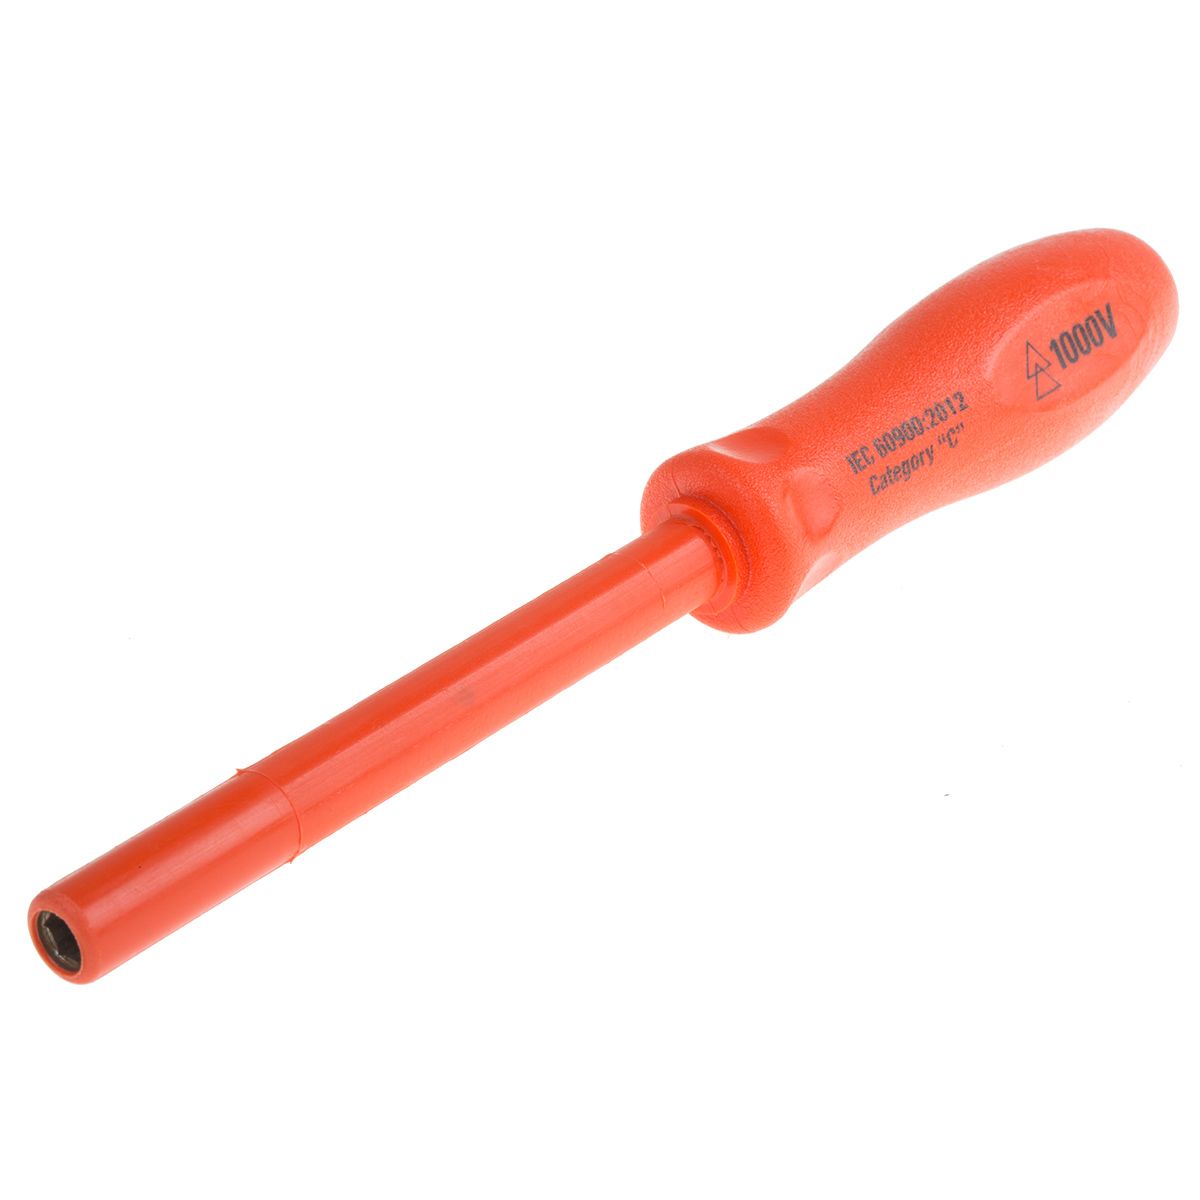 ITL Insulated Tools Ltd 3BA Hexagon Nut Driver,  VDE/1000V Approved, 105 mm Blade Length